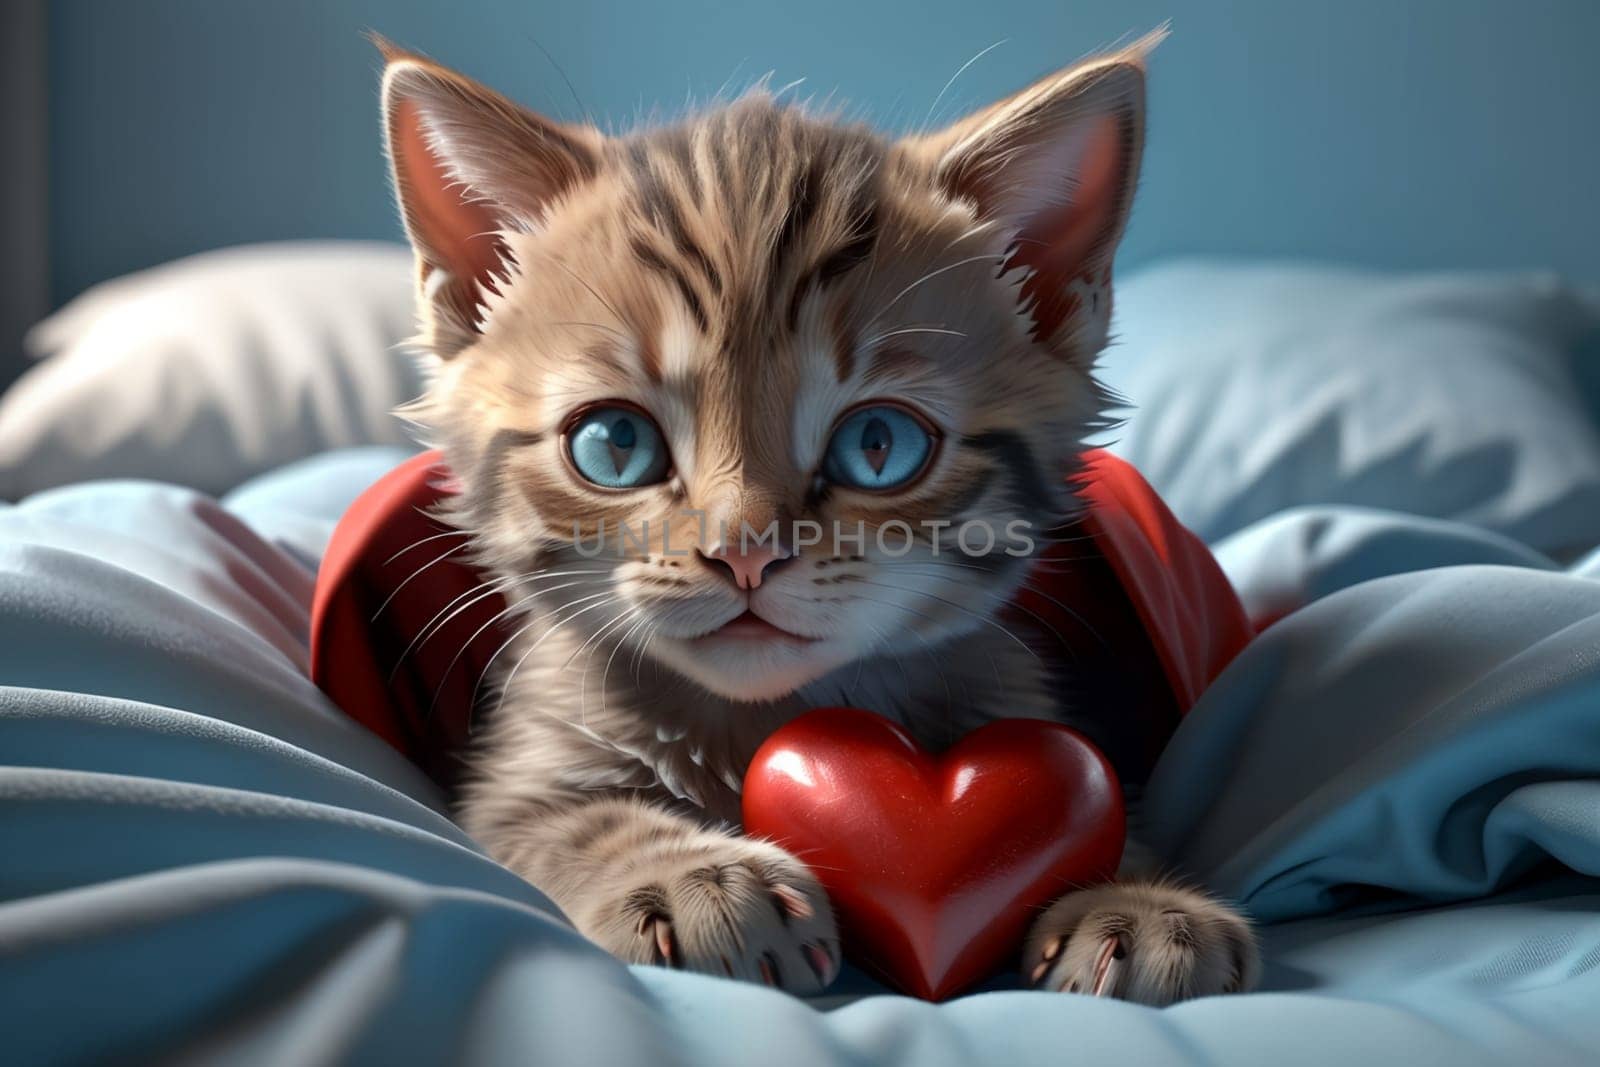 Cute kitten with red heart, isolated on blue background by Rawlik